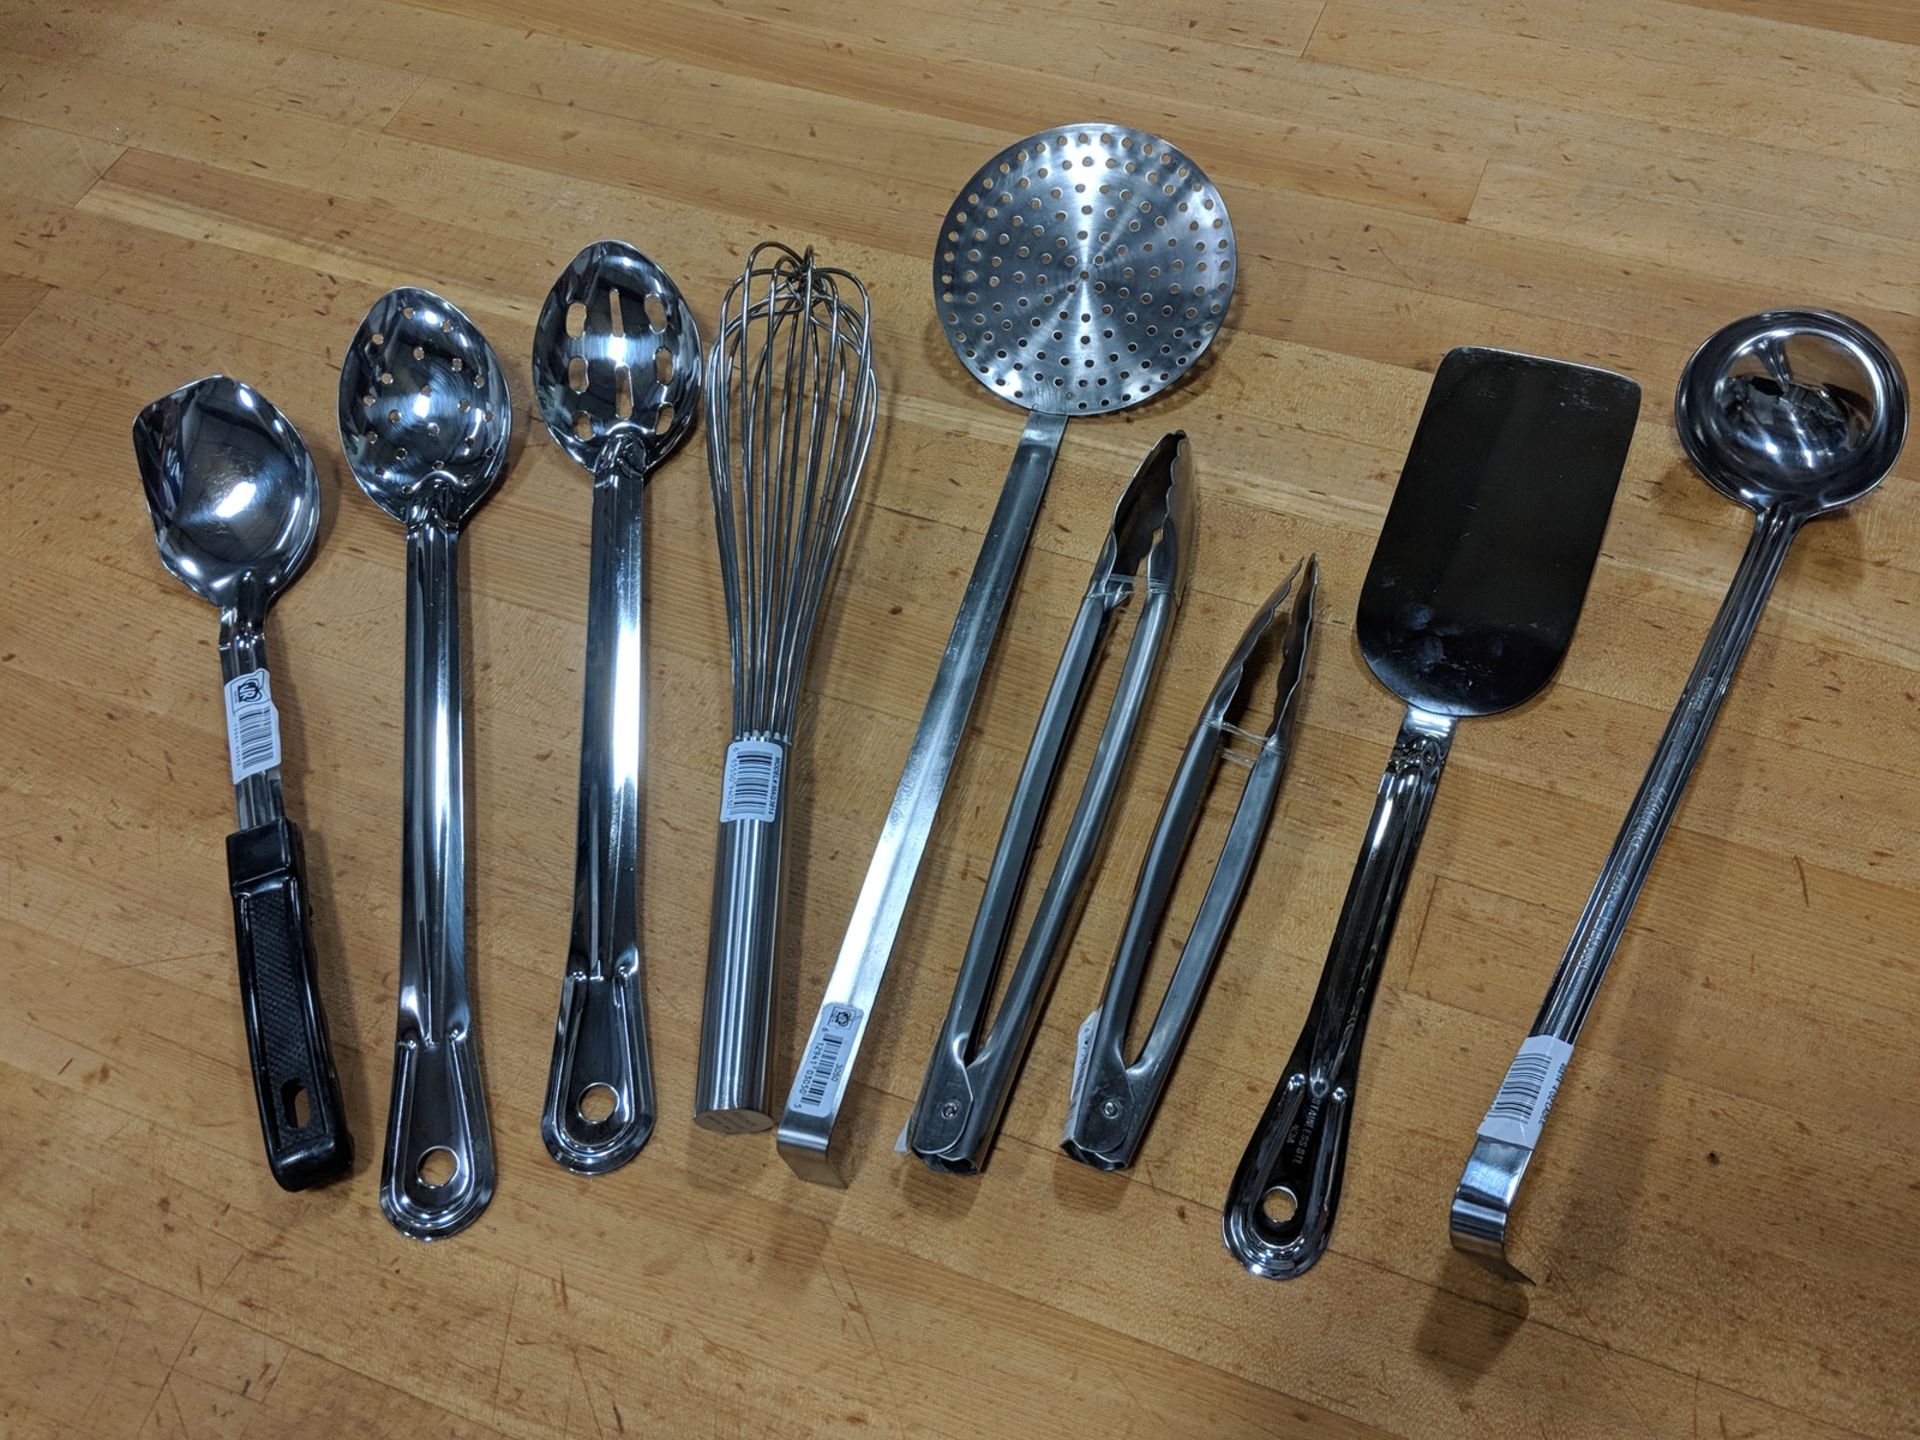 Stainless Kitchen Tools Set - Lot of 9 Pieces - Image 2 of 2